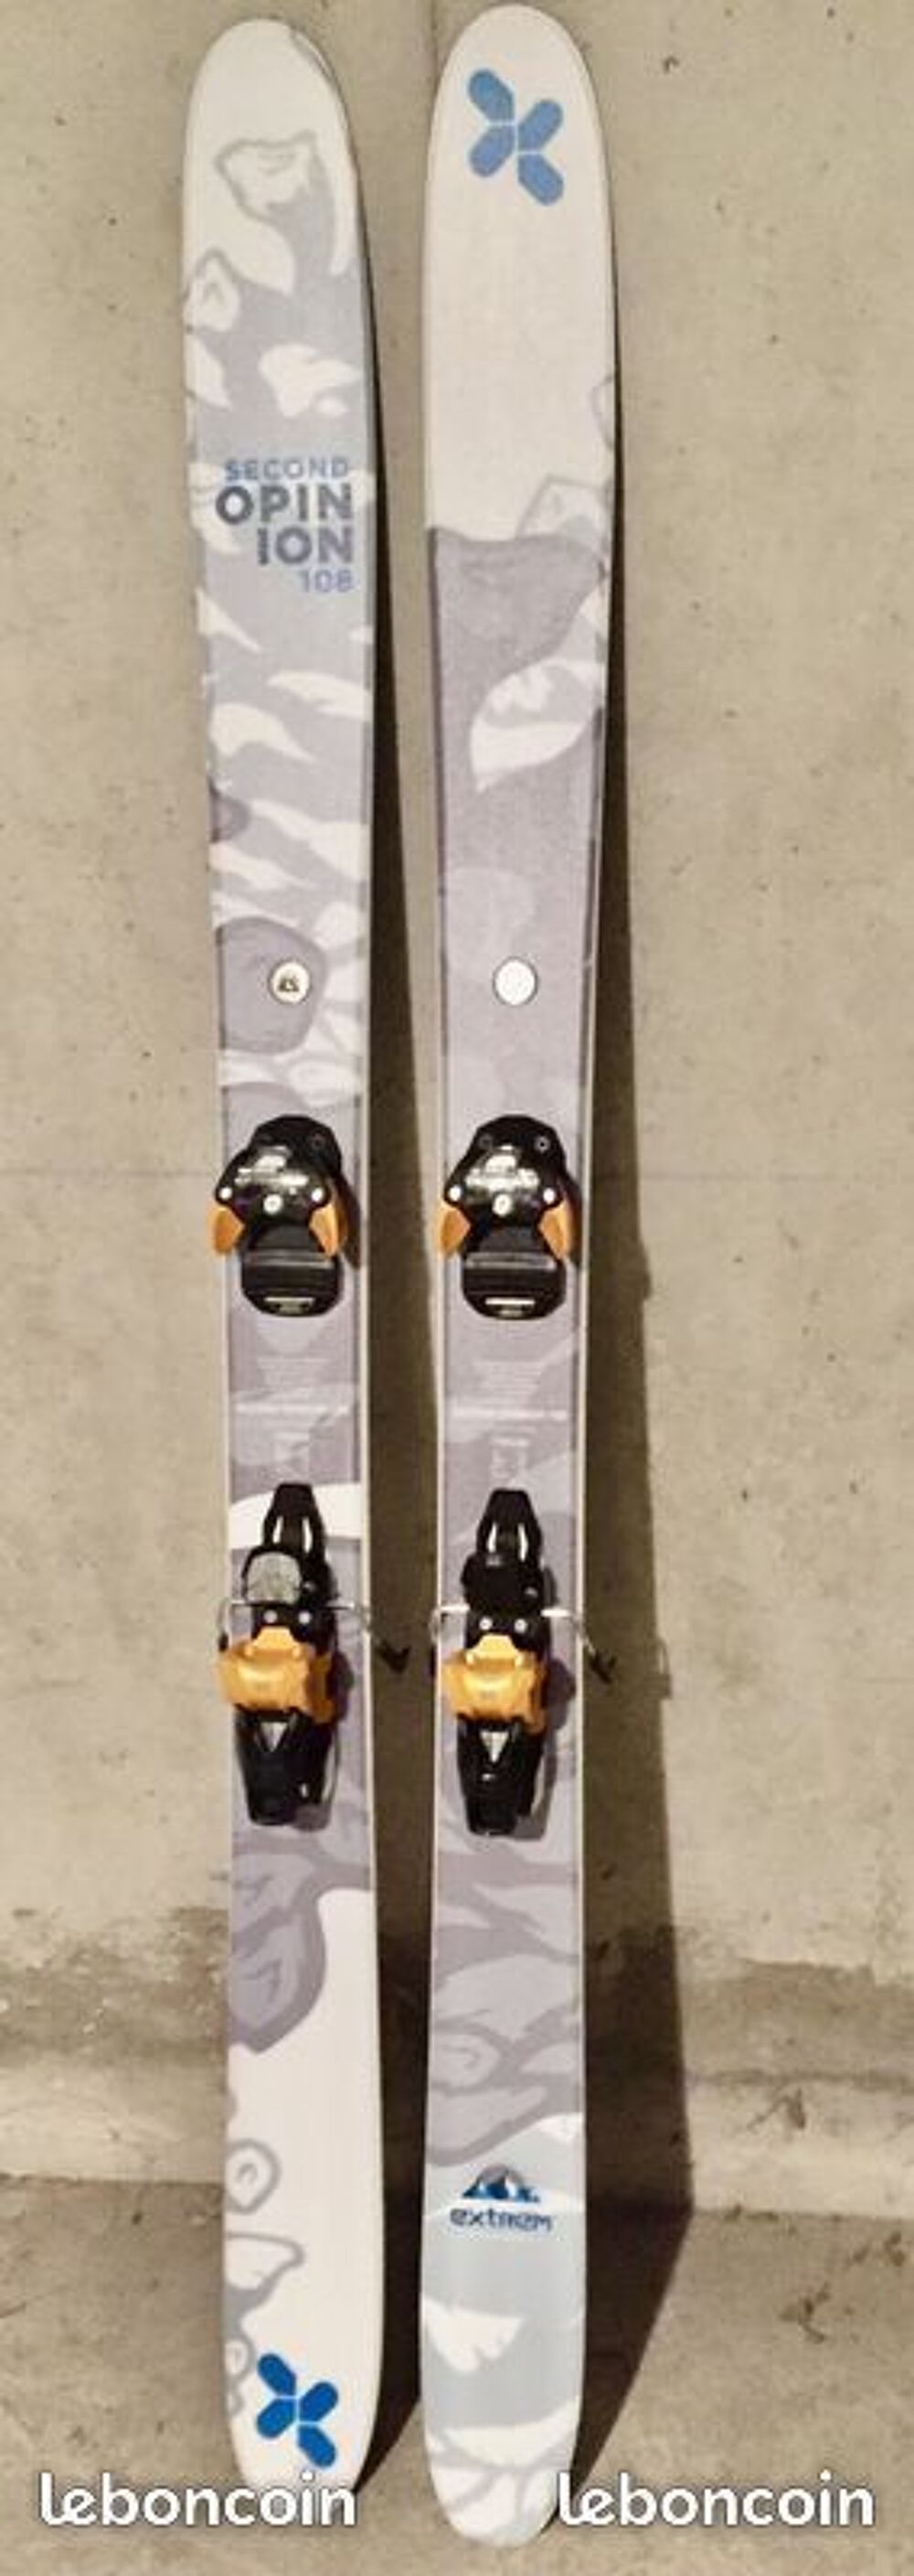 skis EXTREM second opinion 108 taille 179 avec fixations NEU Sports